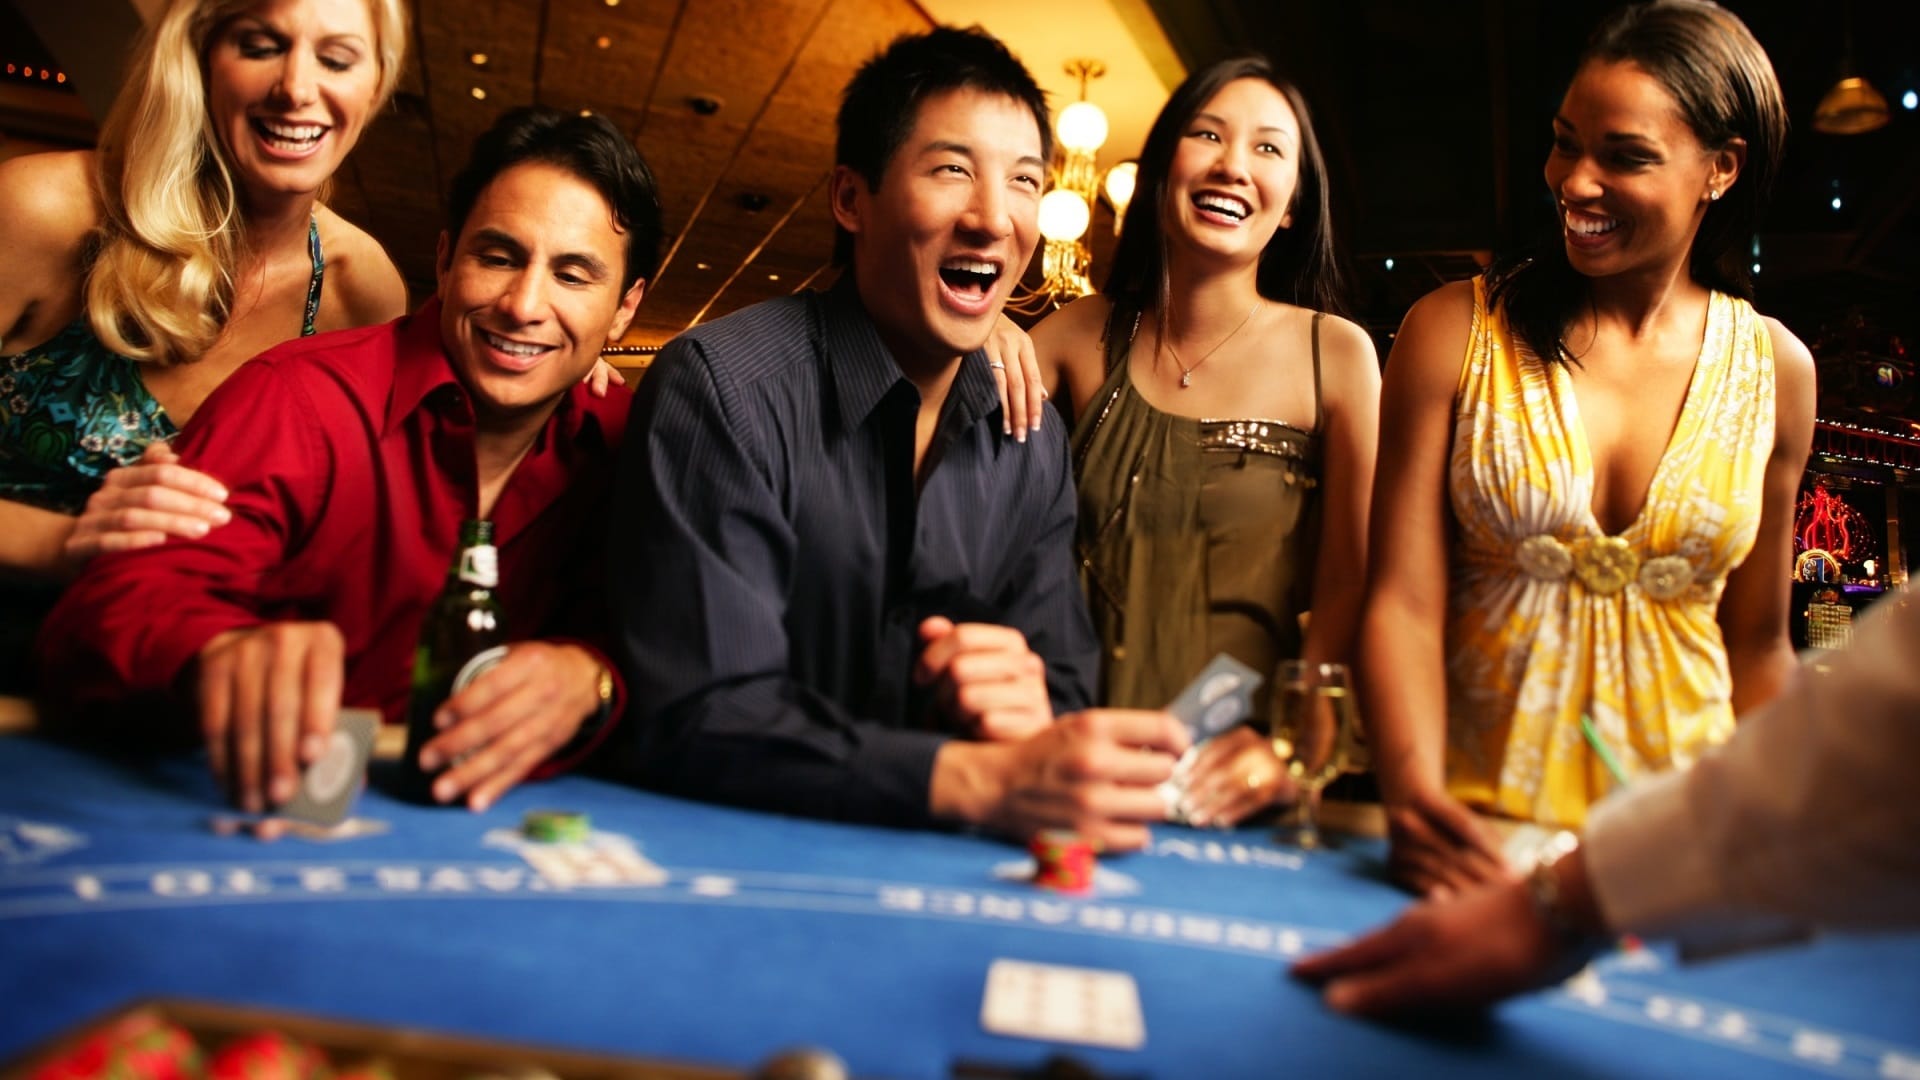 Play Online Casino Games With Peace of Mind